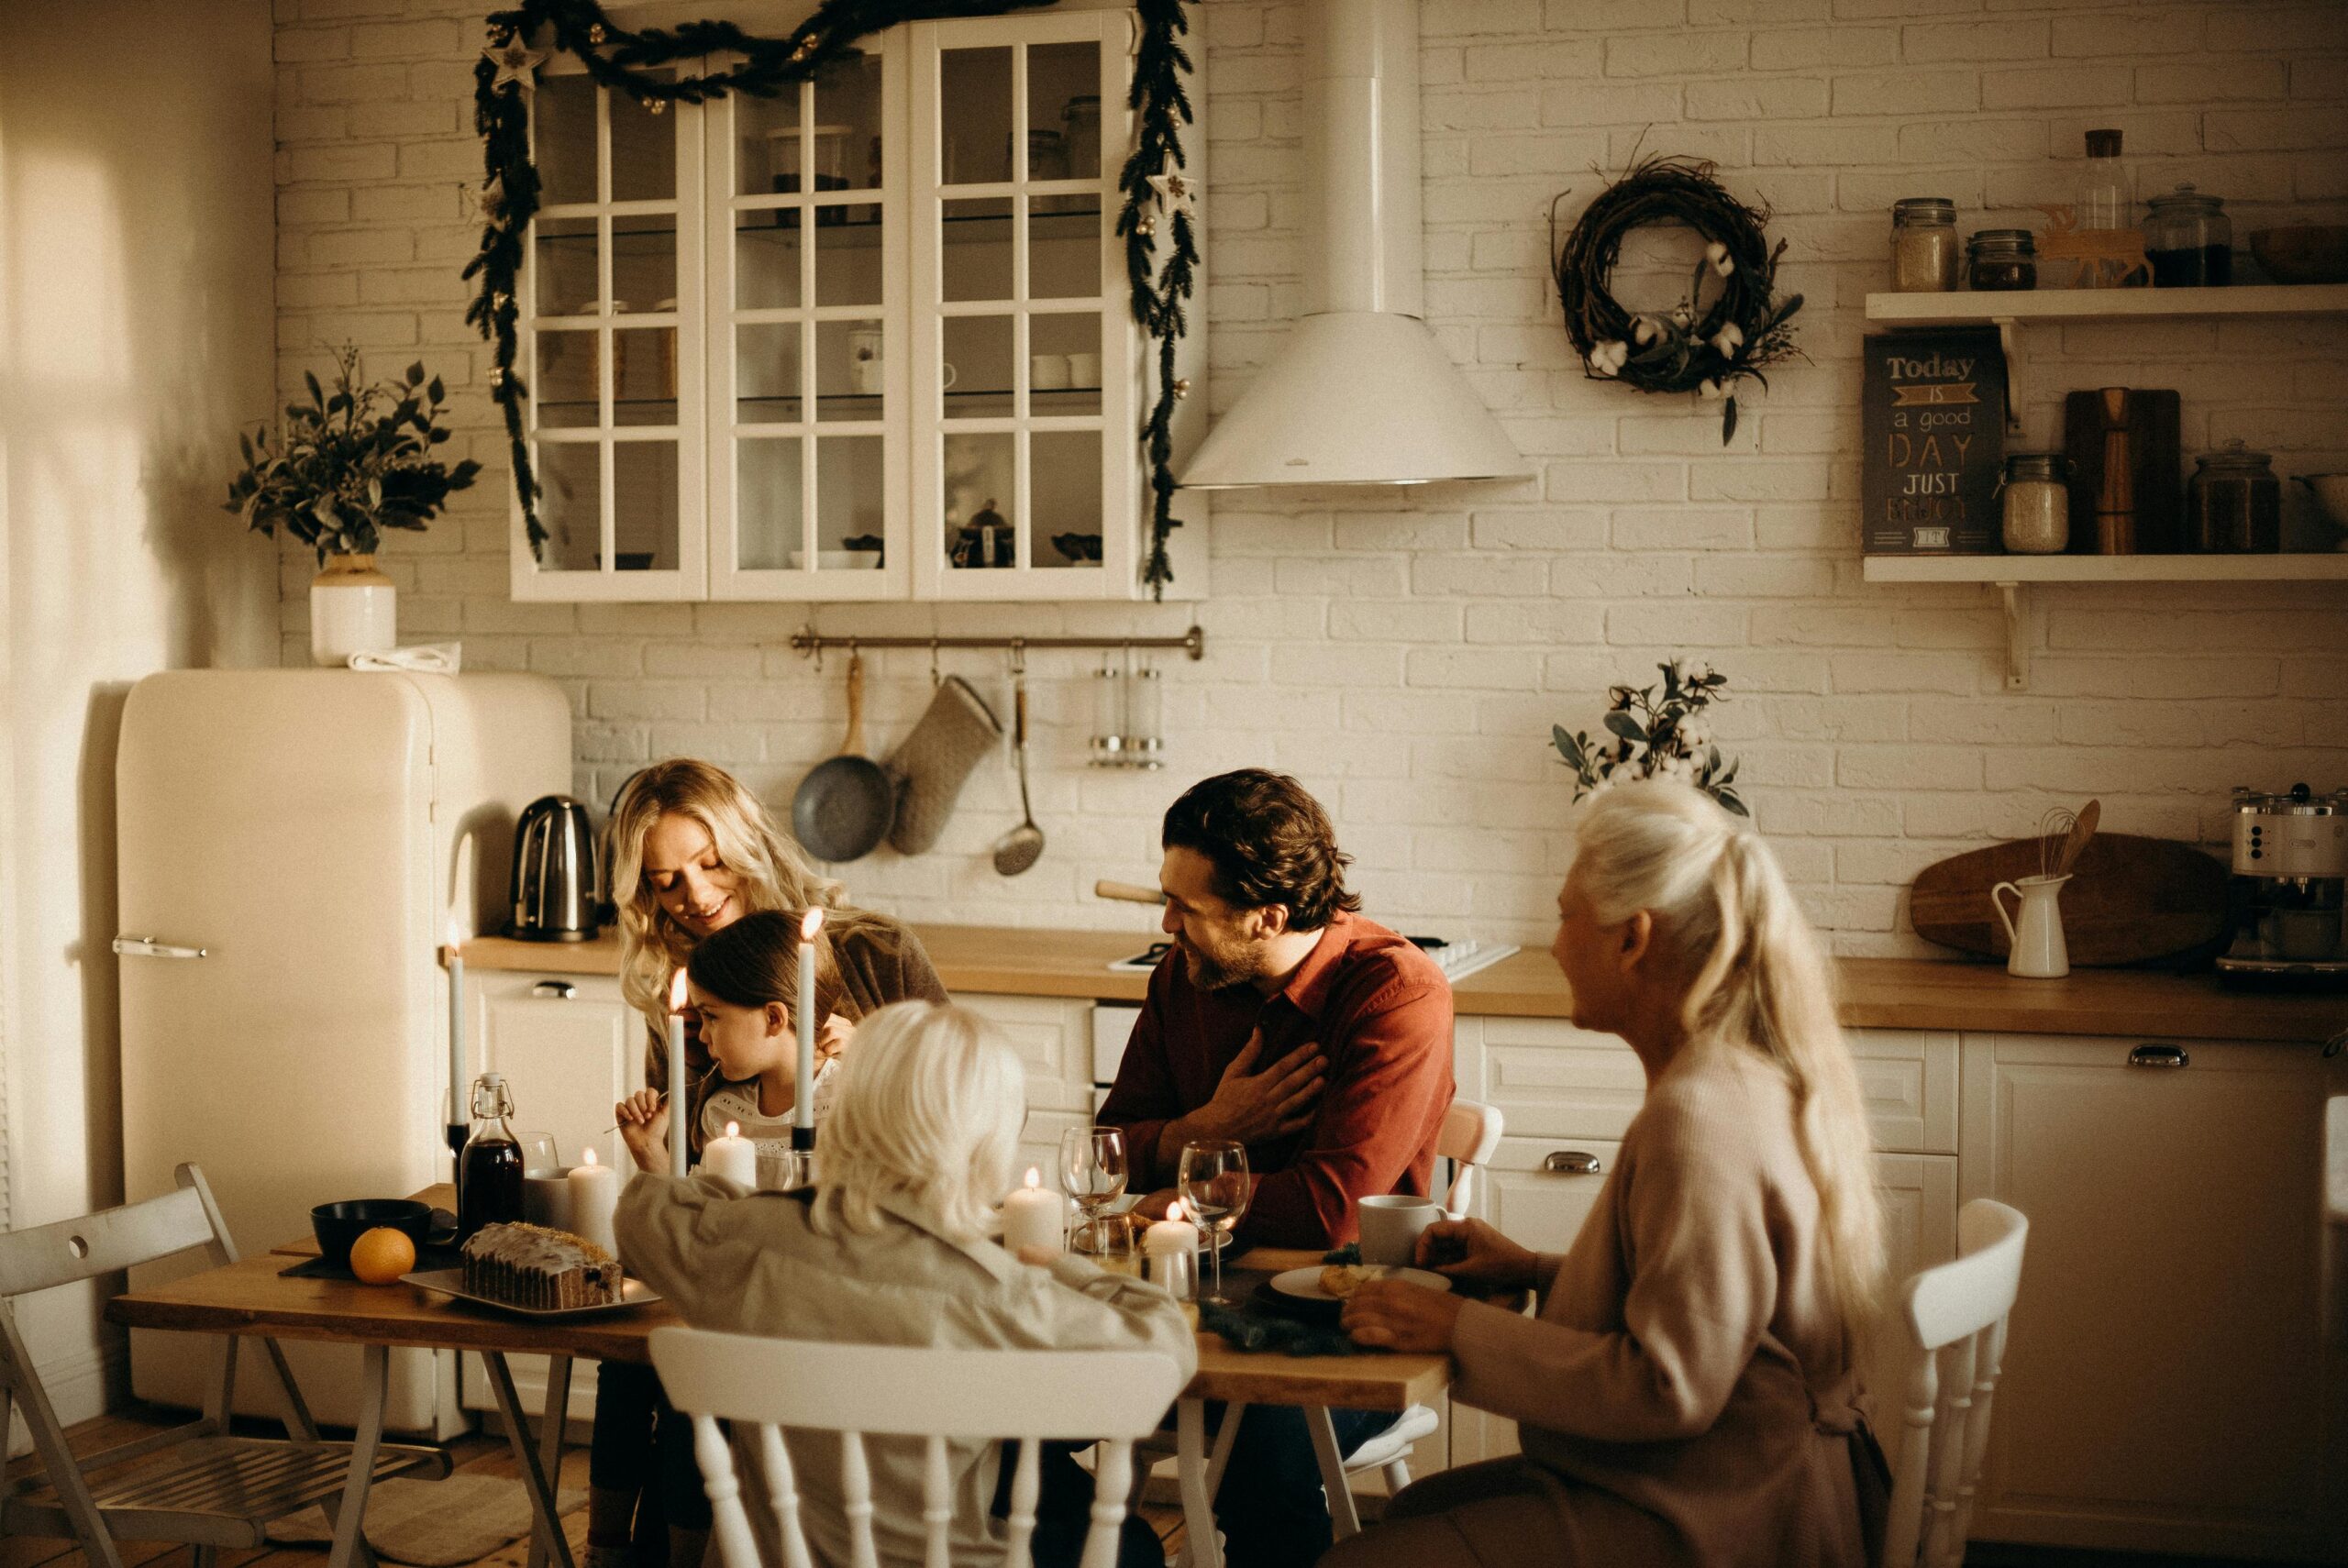 Family sitting at a table sharing a meal together.